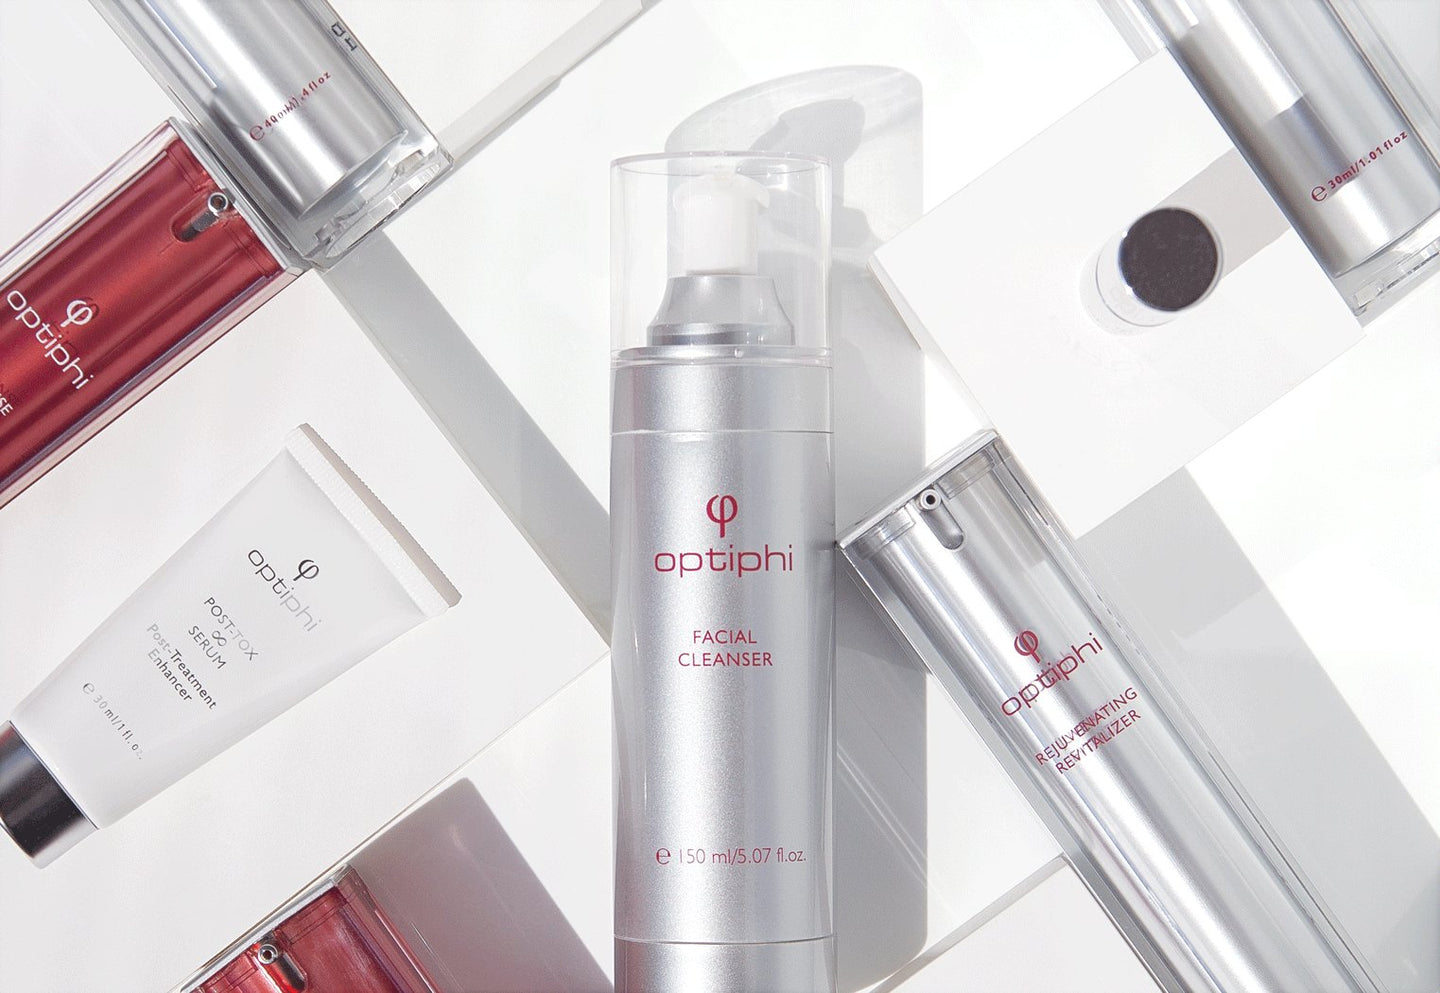 Active, results driven skincare products that treat specific skin concerns.